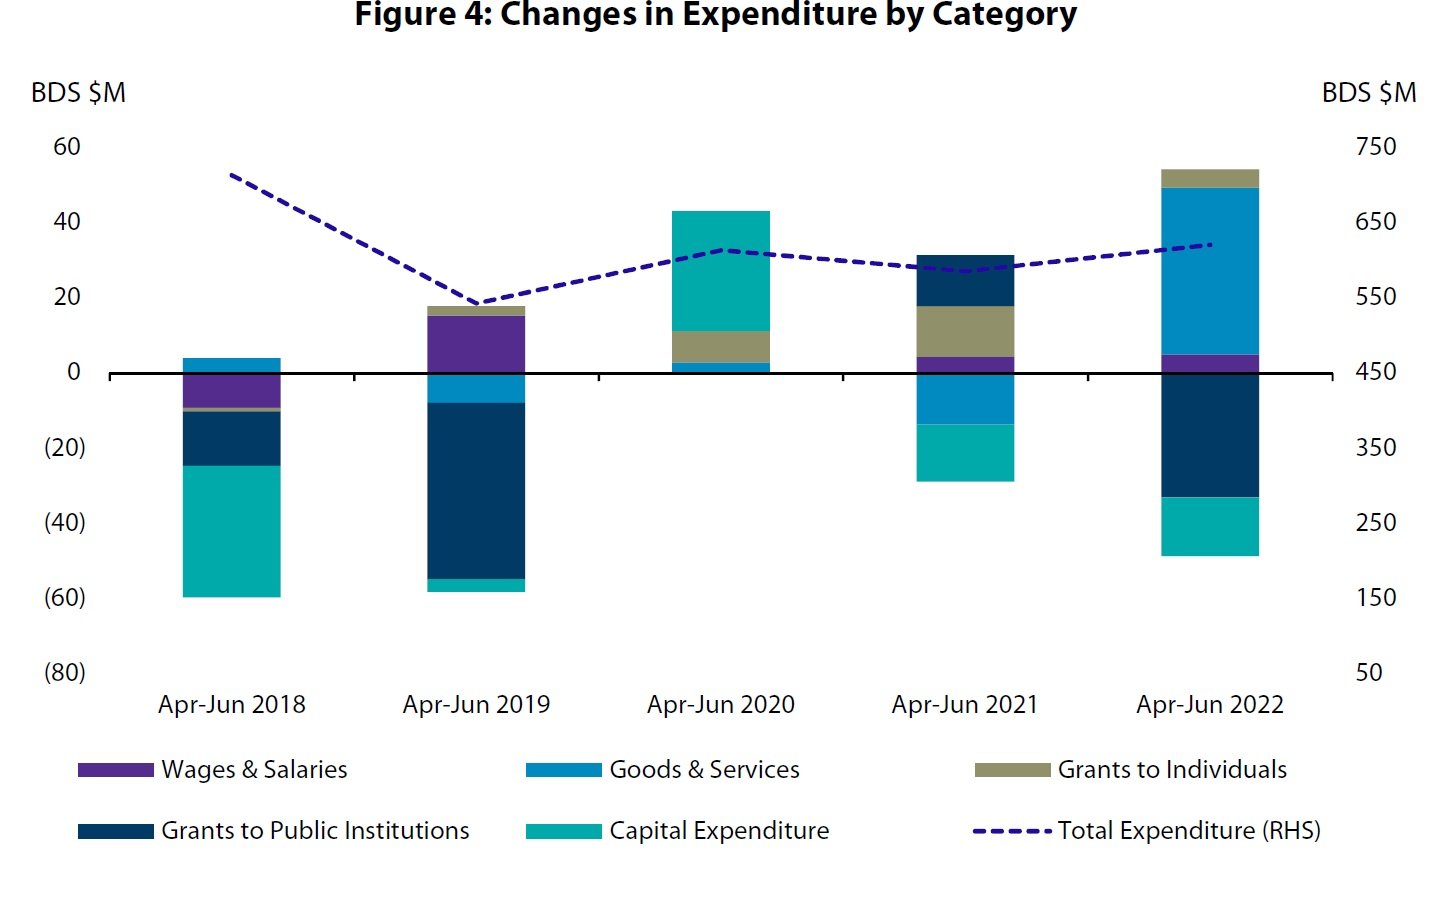 GRAPHIC 7 - CHANGES IN EXPENDITURE  BY CATEGORY - MINISTRY OF FINANCE.jpg